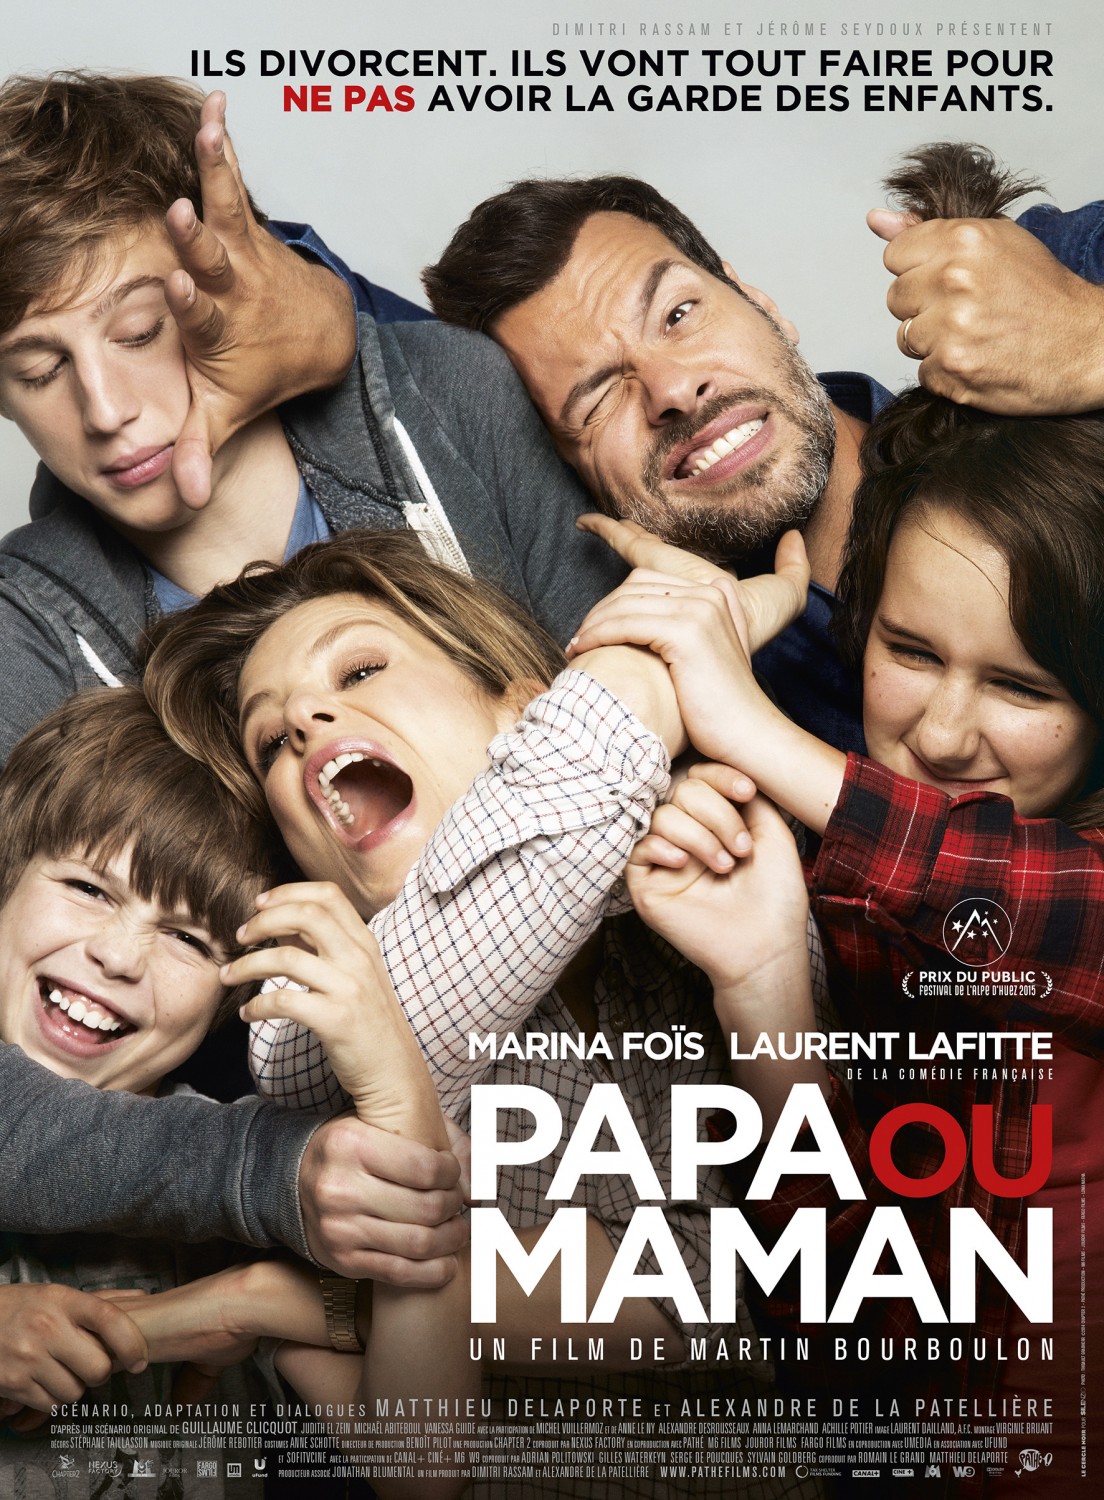 Extra Large Movie Poster Image for Papa ou maman 